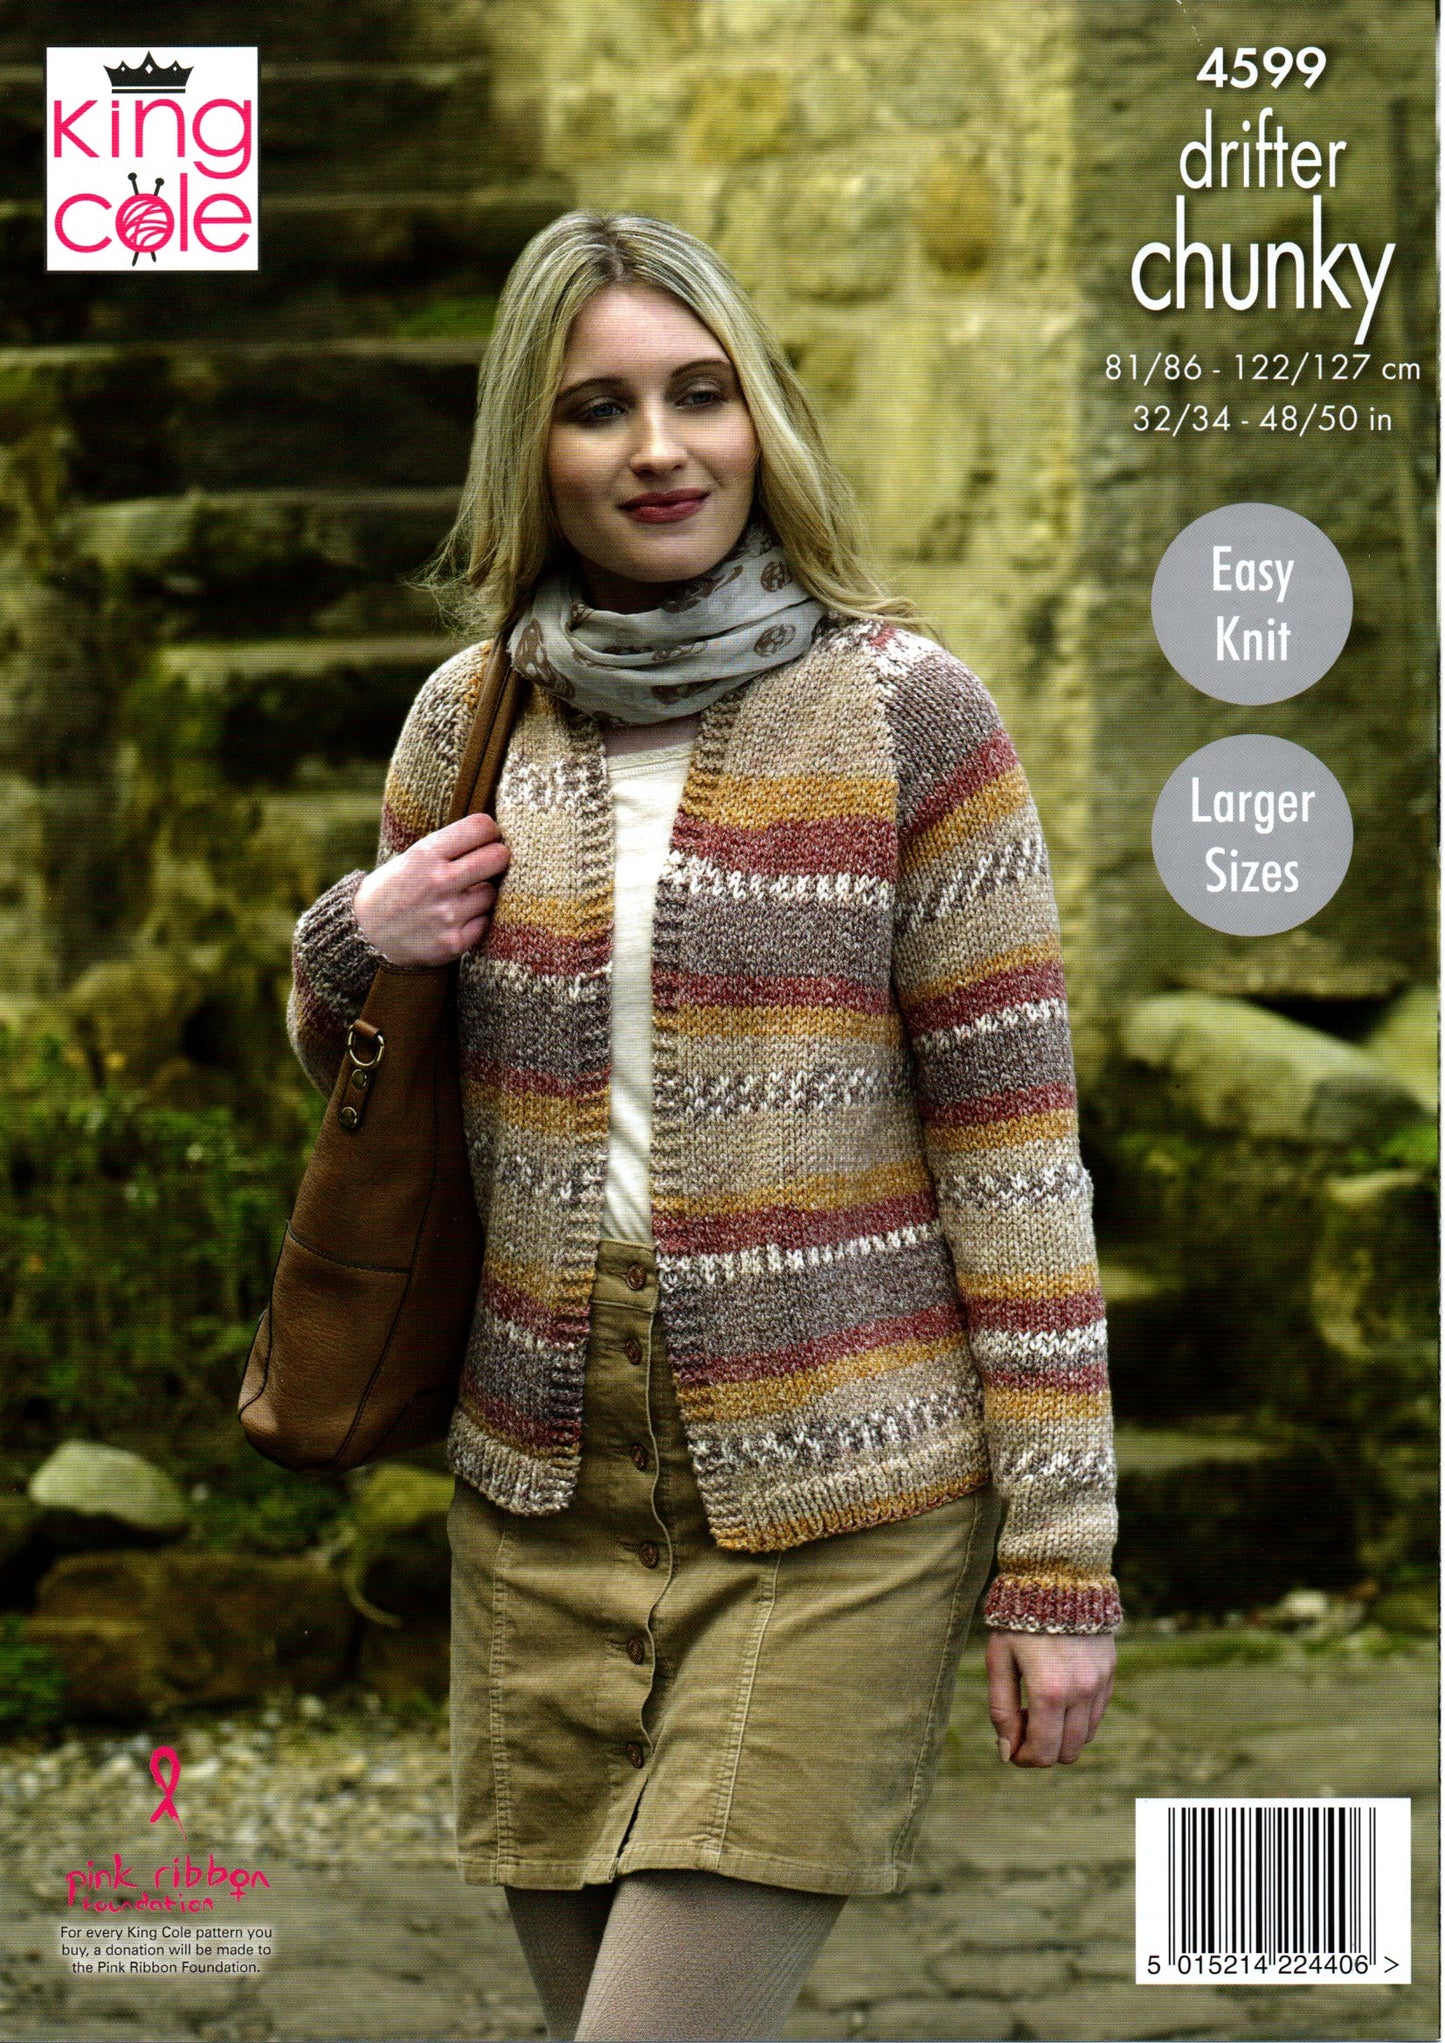 King Cole 4599 Ladies Larger Size Cardigans Chunky Knitting Pattern